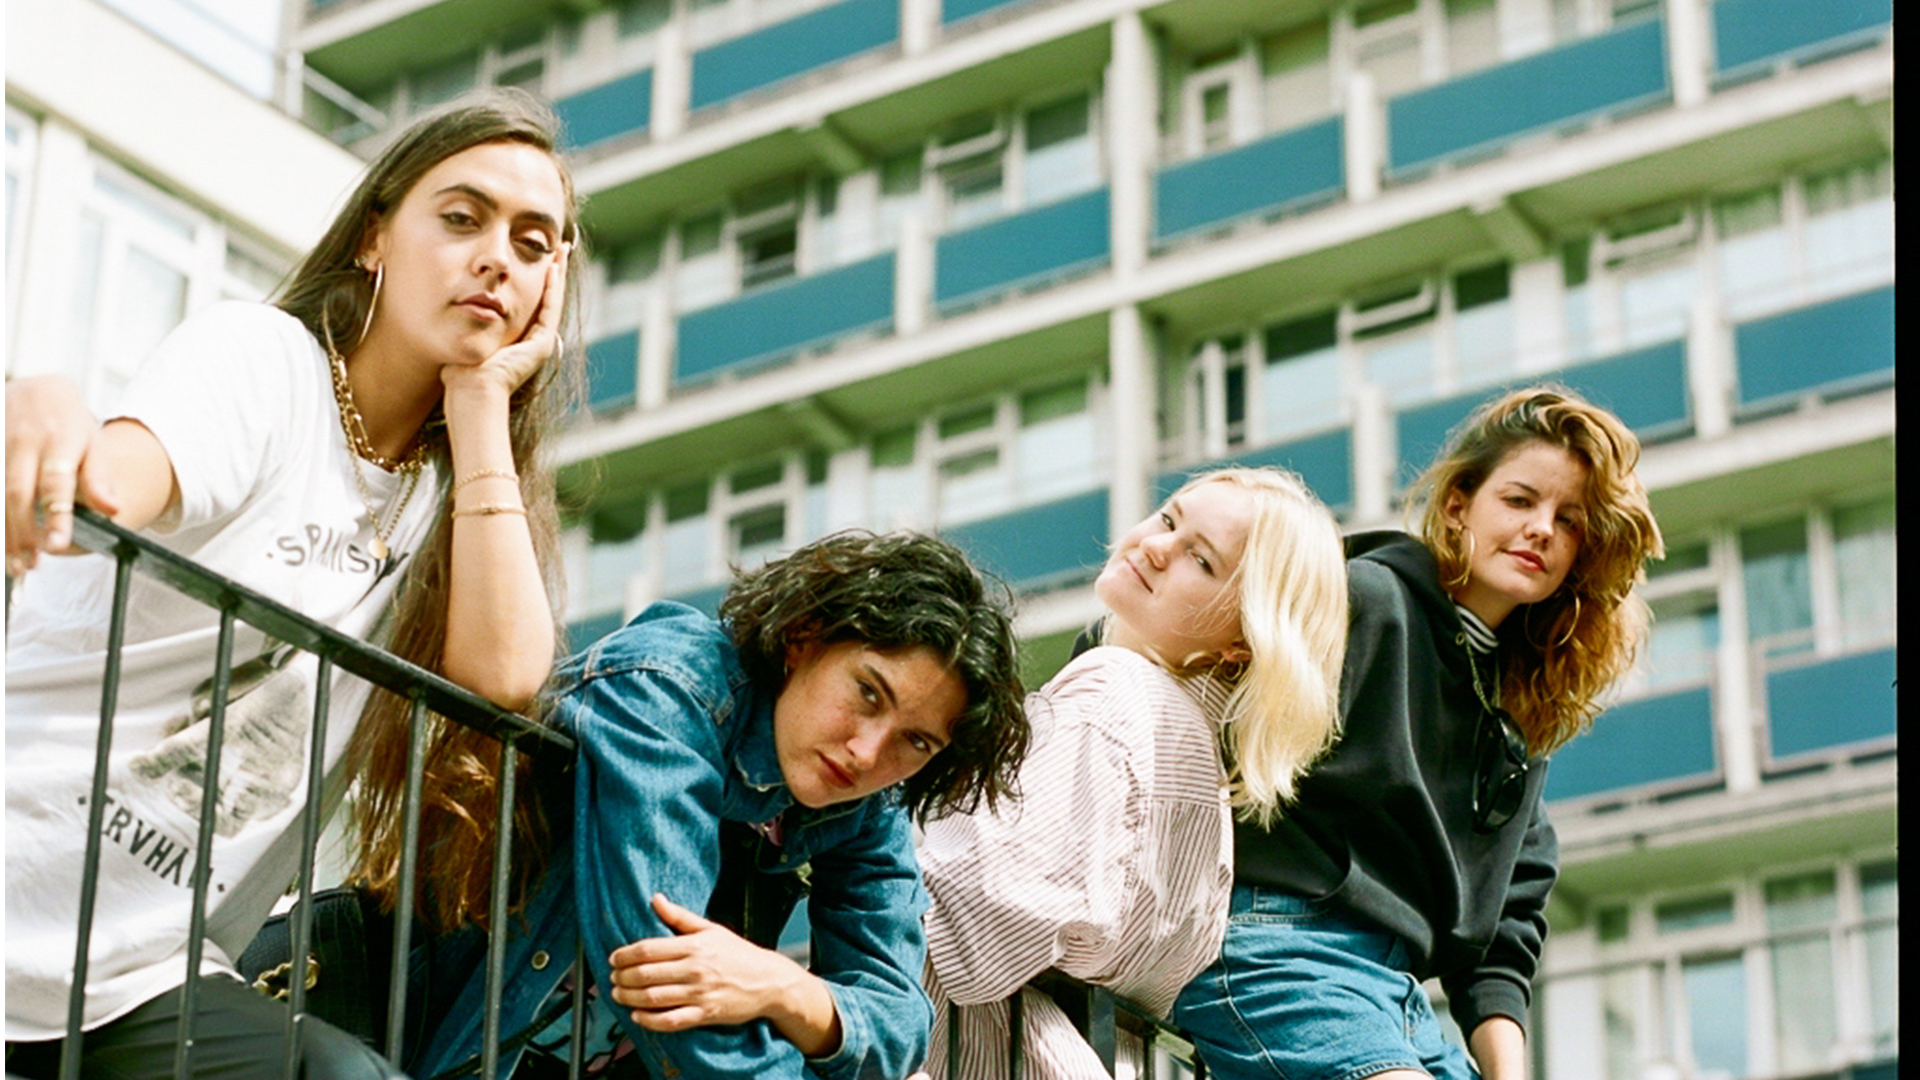 Vibrant Indie Band Hinds Return With Empowering and Genre-Defying Album ...